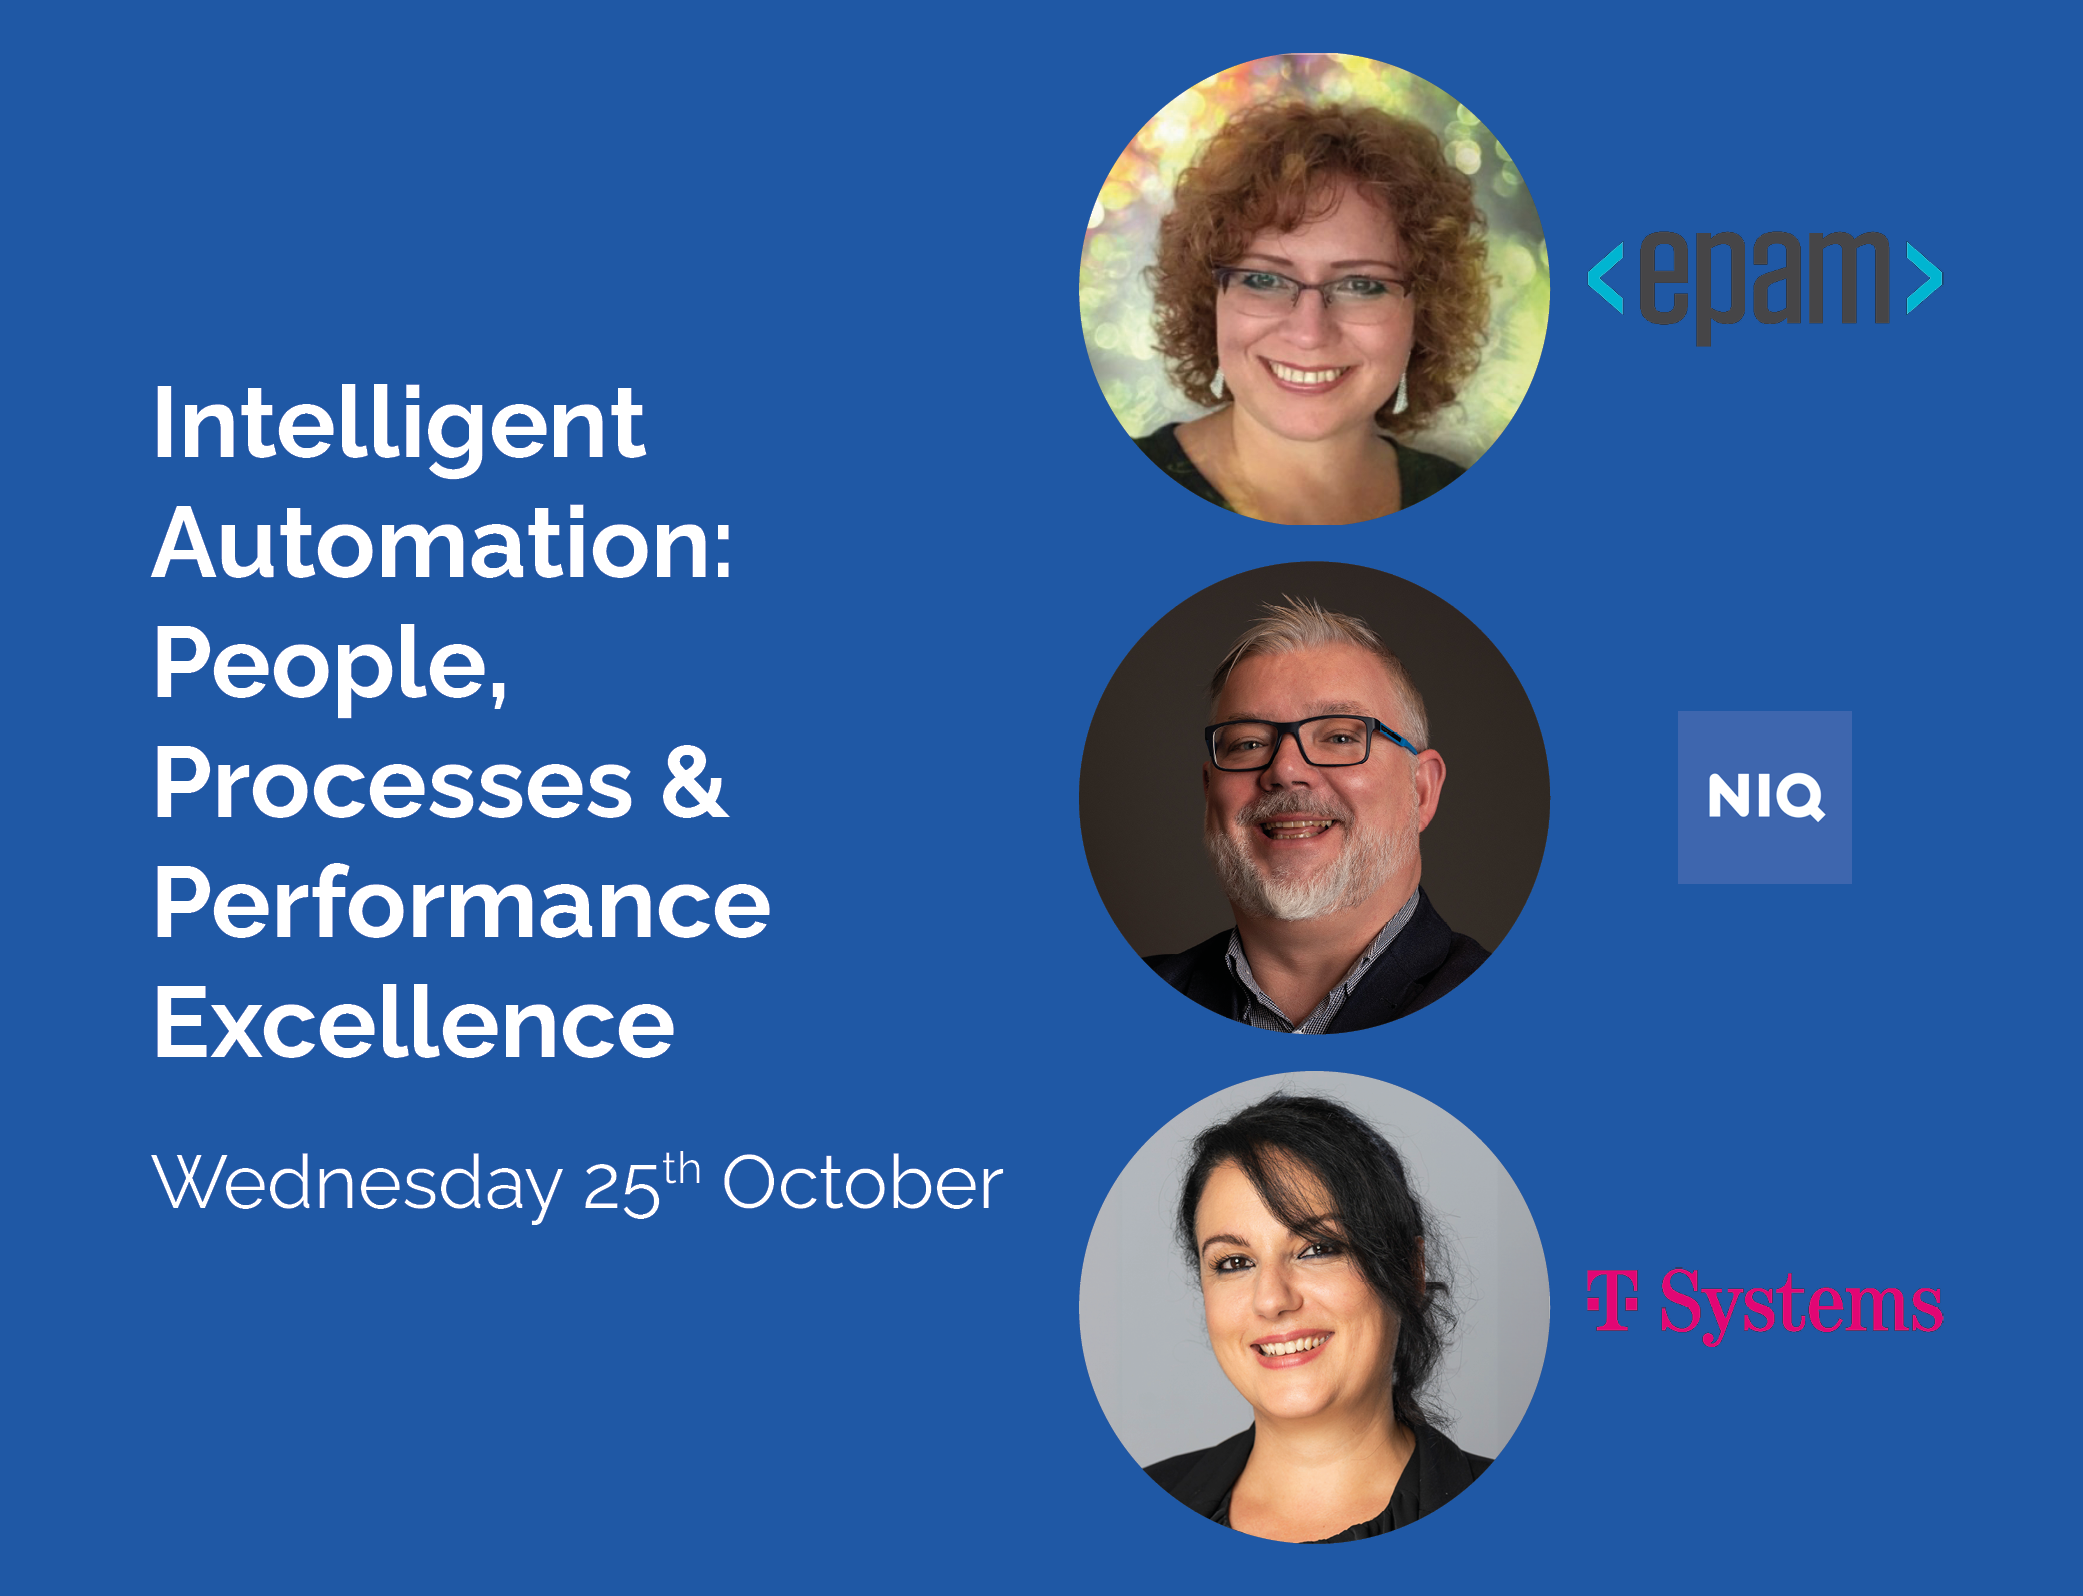 Intelligent Automation: People, Processes & Performance Excellence